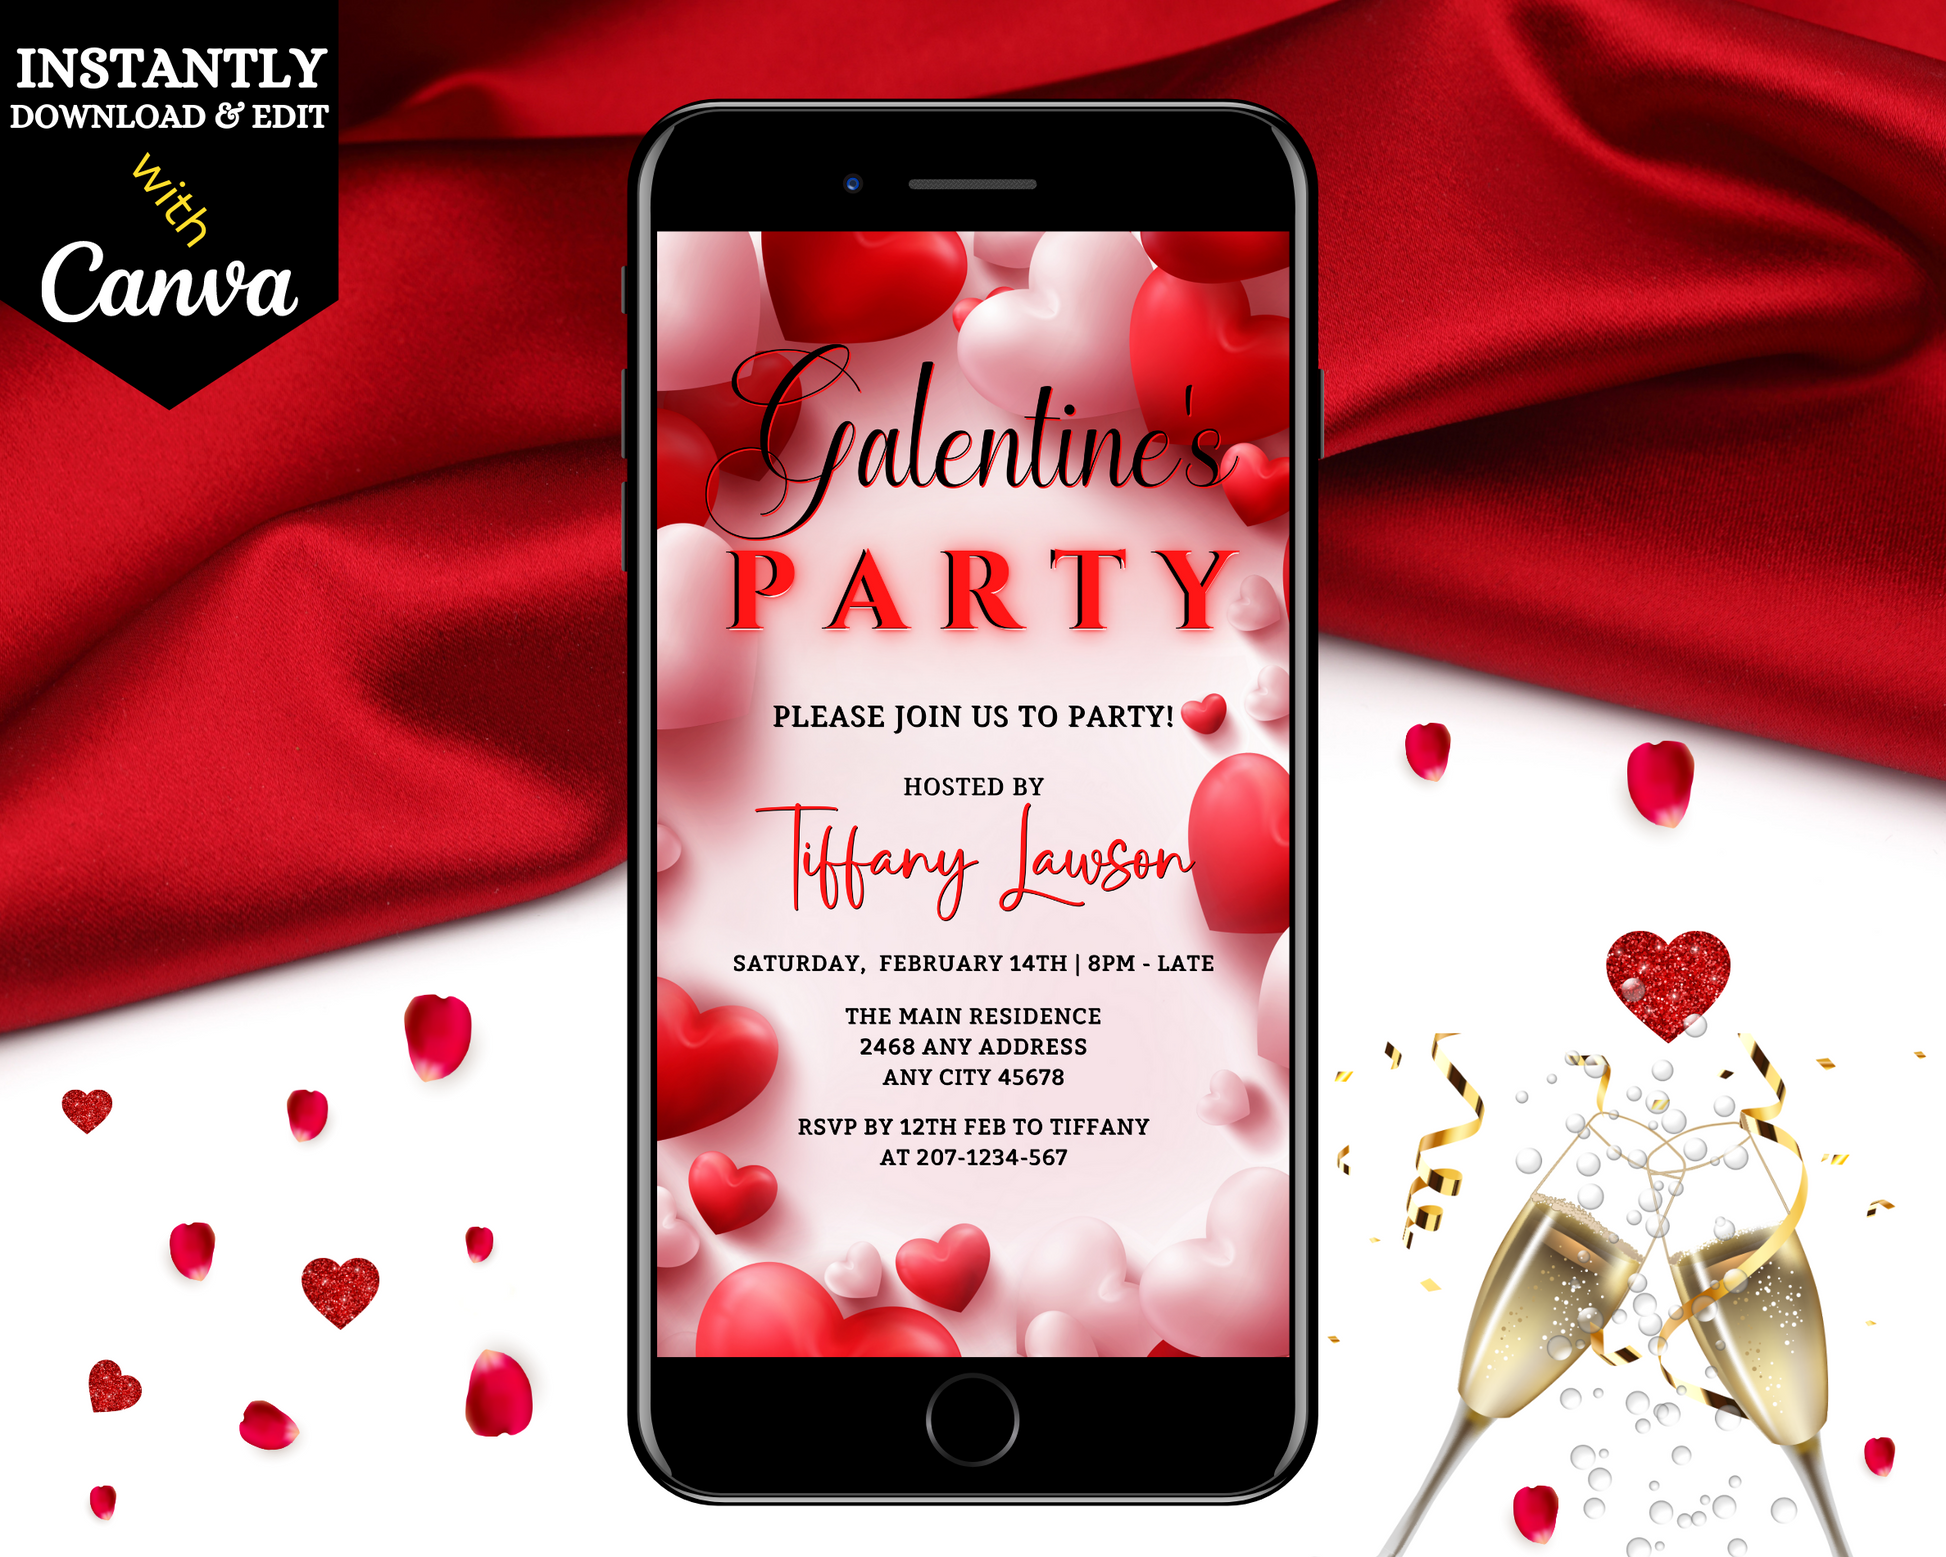 Smartphone displaying the Editable Digital White Boarder Red Hearts Galentines Party Evite template, surrounded by red cloth and confetti.